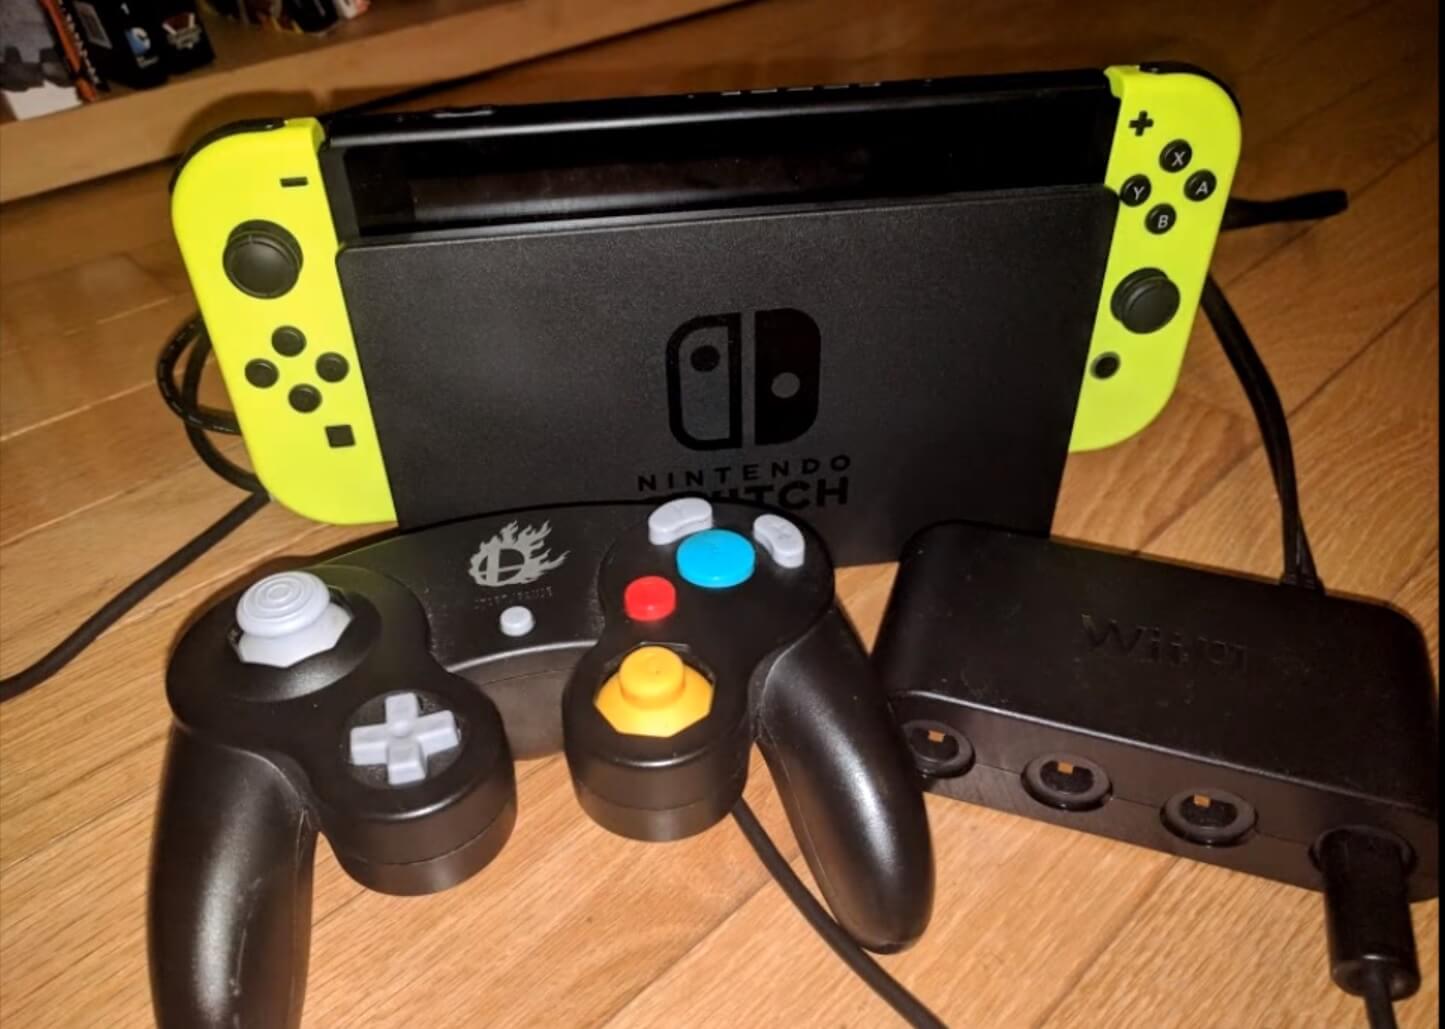 Nintendo Switch now supports GameCube controllers